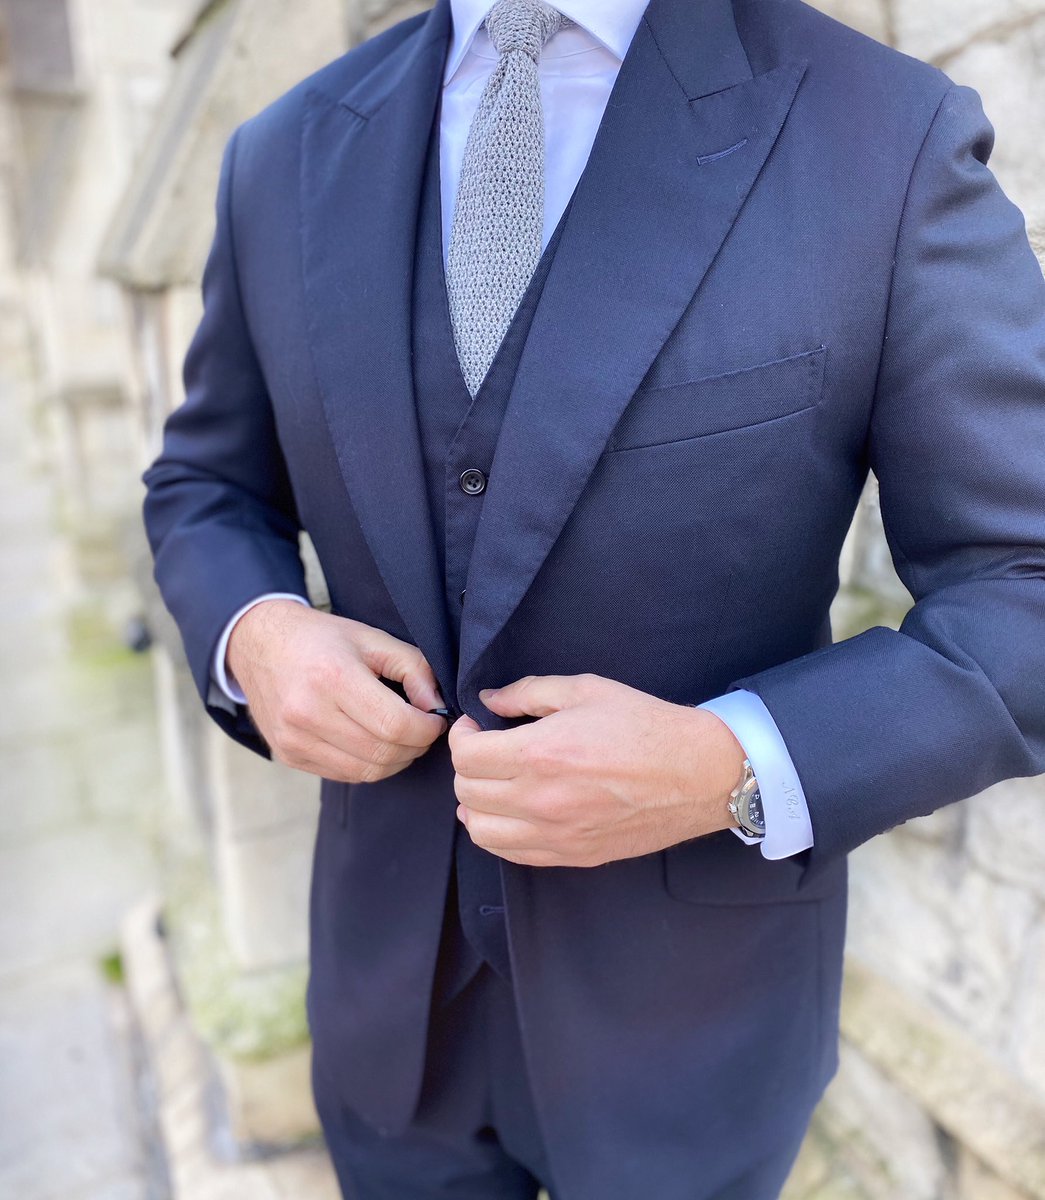 Our beautiful 12oz wool hopsack cloth from @yorkshiretextiles works beautifully on our Charles Campbell Bespoke 3 piece suit... we have so many wonderful Cloths ready to create your perfect look 📝